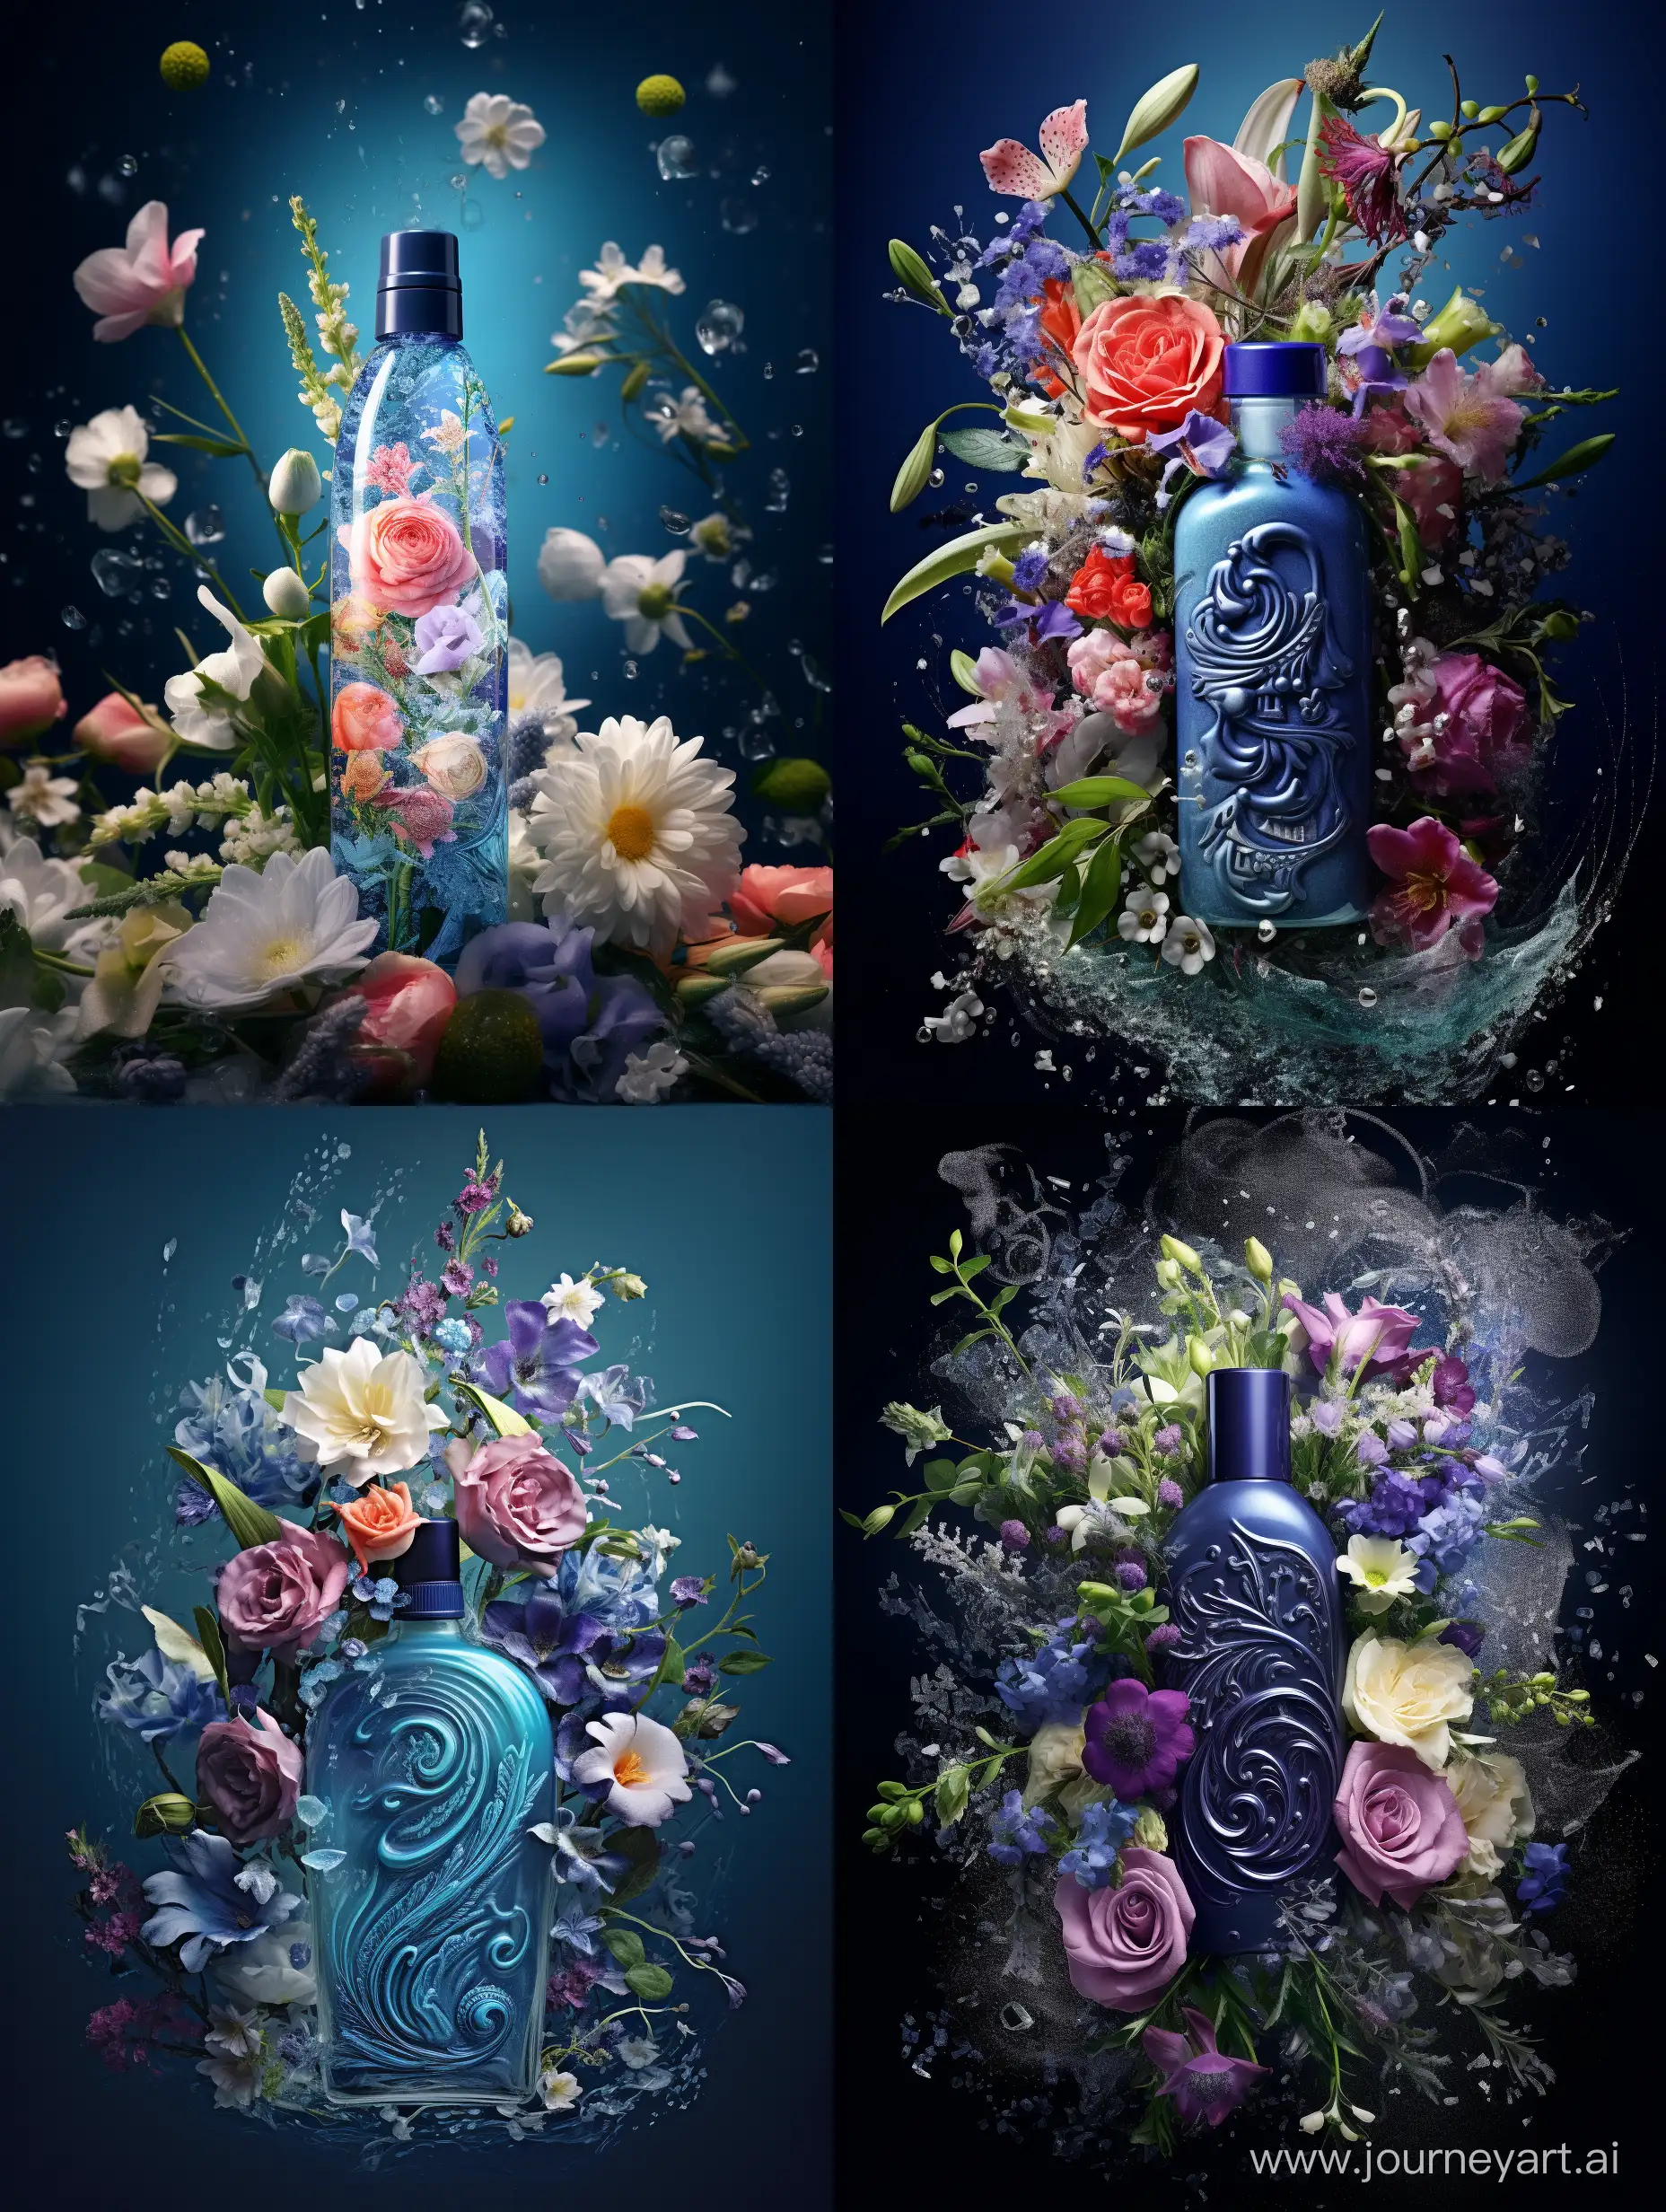 Refreshing-Shampoo-Bottle-Design-with-Water-Splashes-and-Floral-Elegance